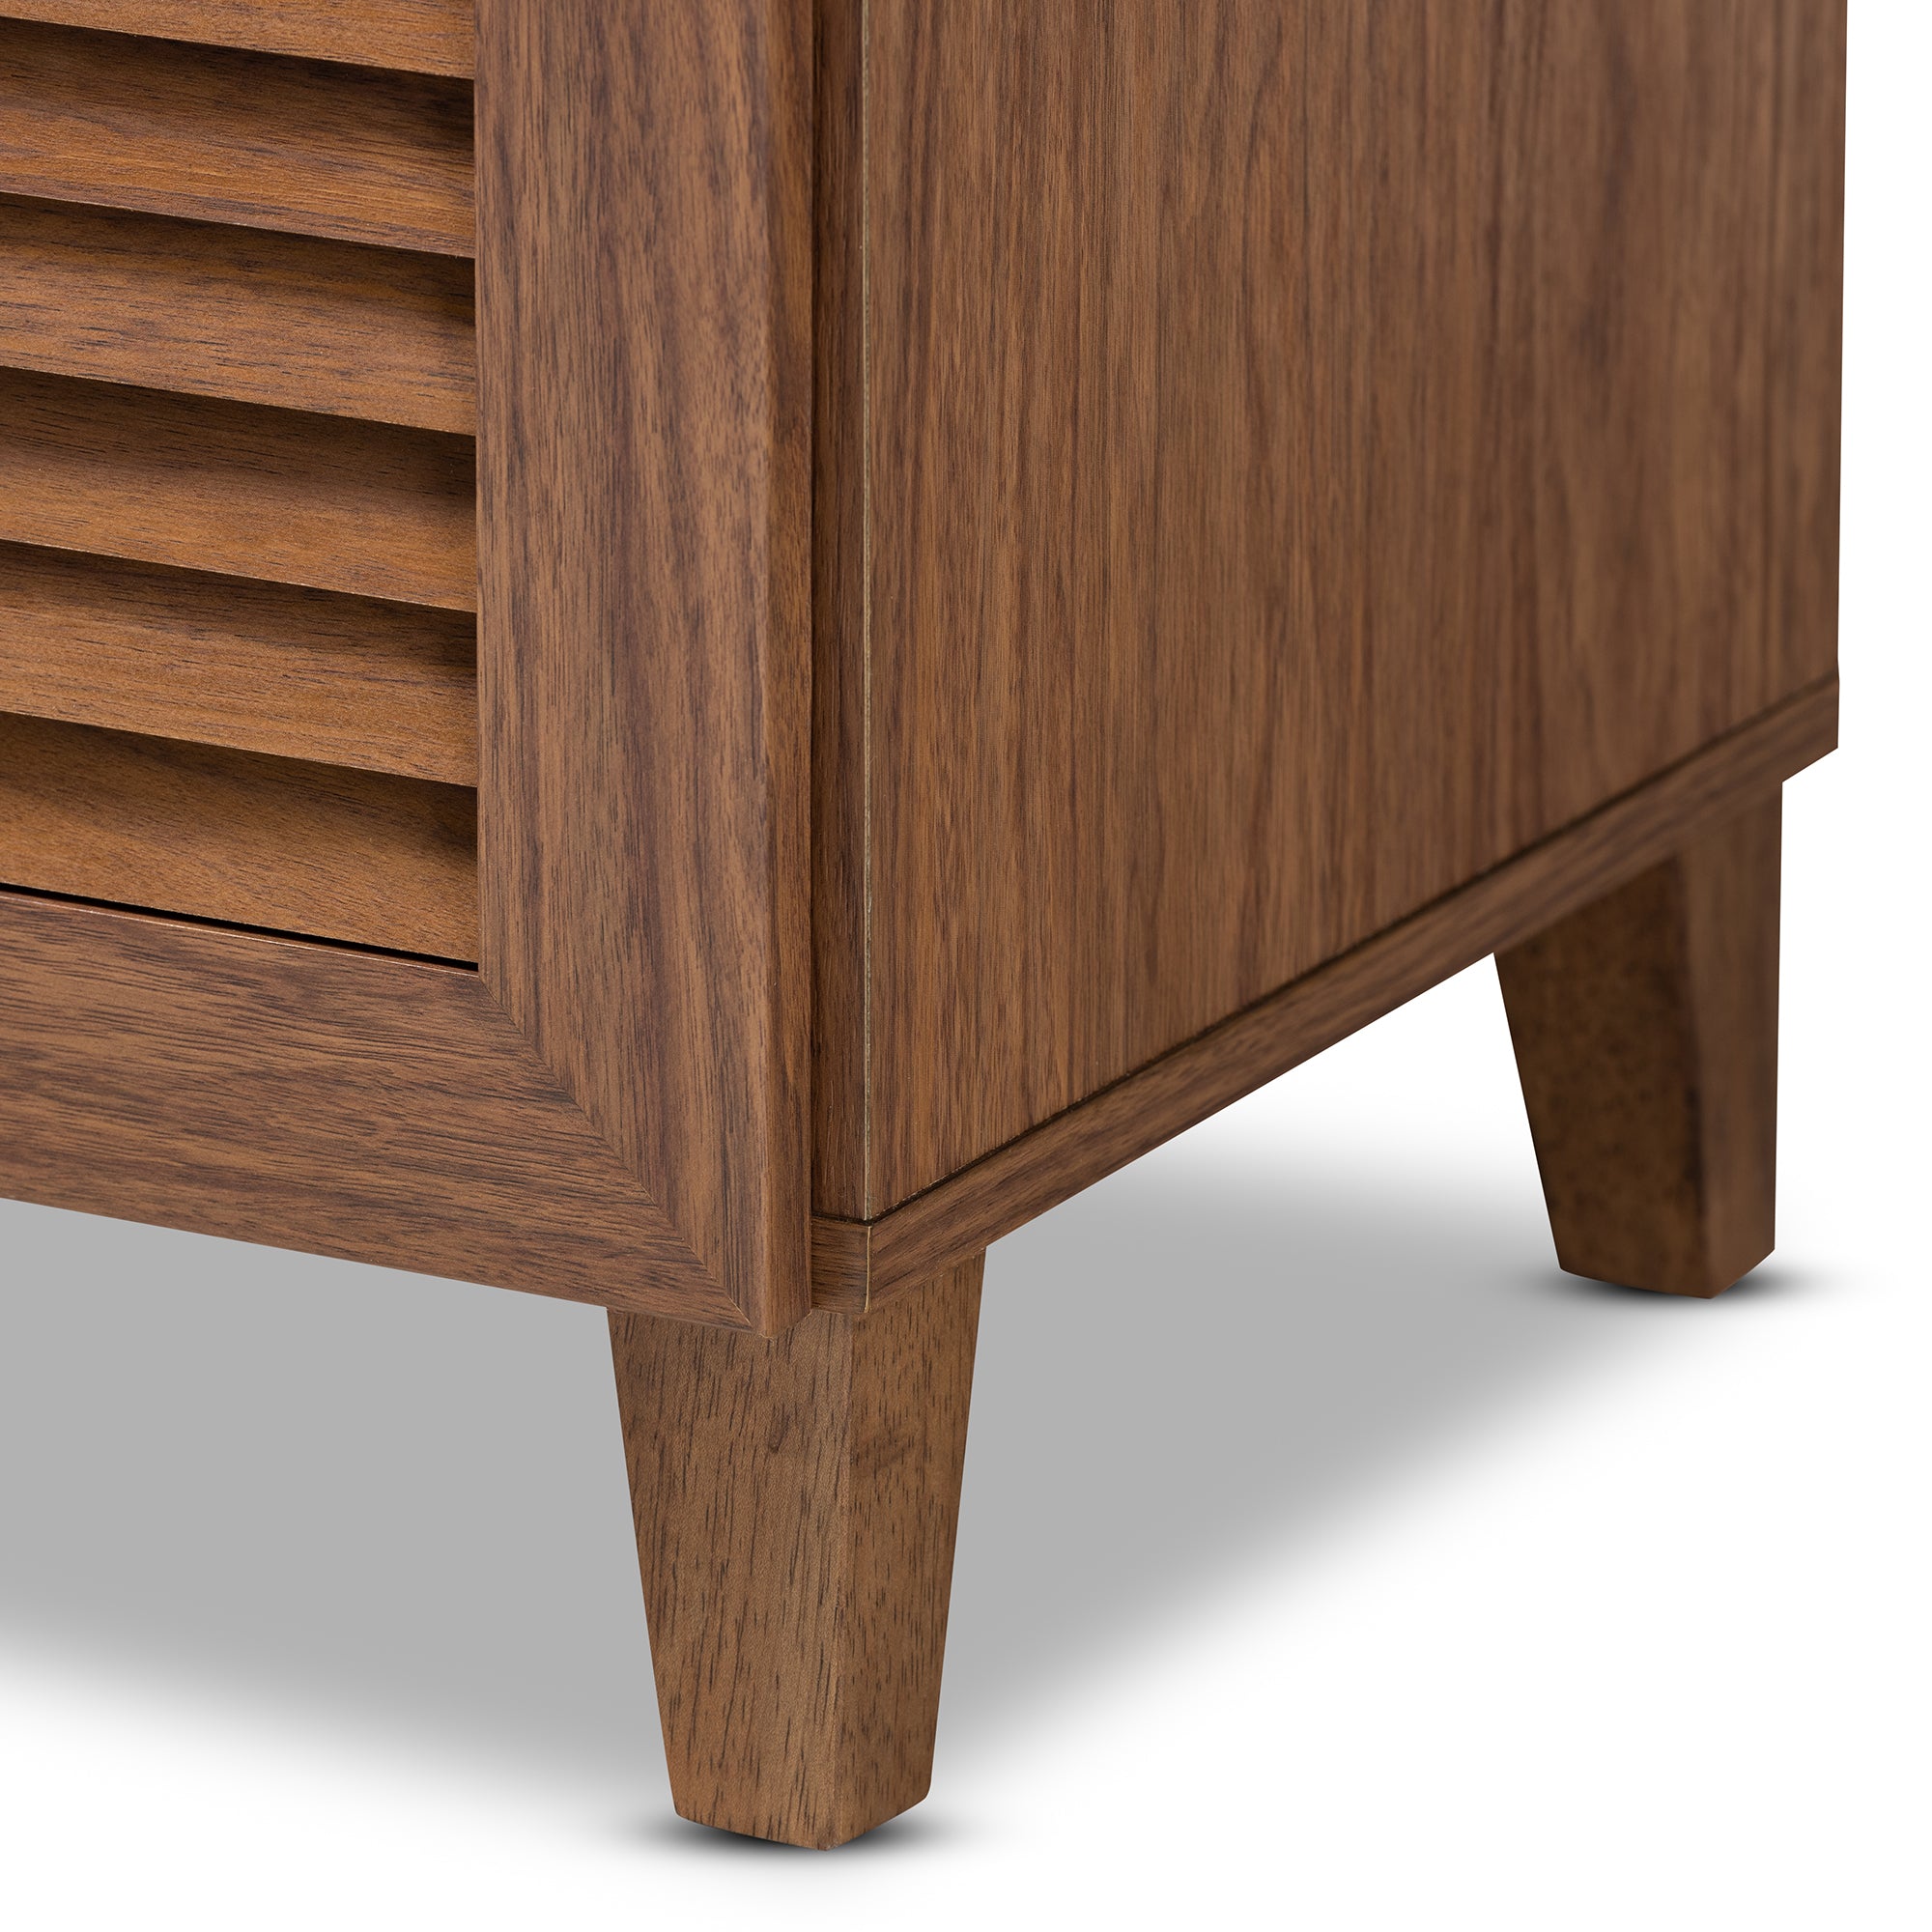 Coolidge Contemporary Shoe Cabinet 5-Shelf with Drawer-Shoe Cabinet-Baxton Studio - WI-Wall2Wall Furnishings